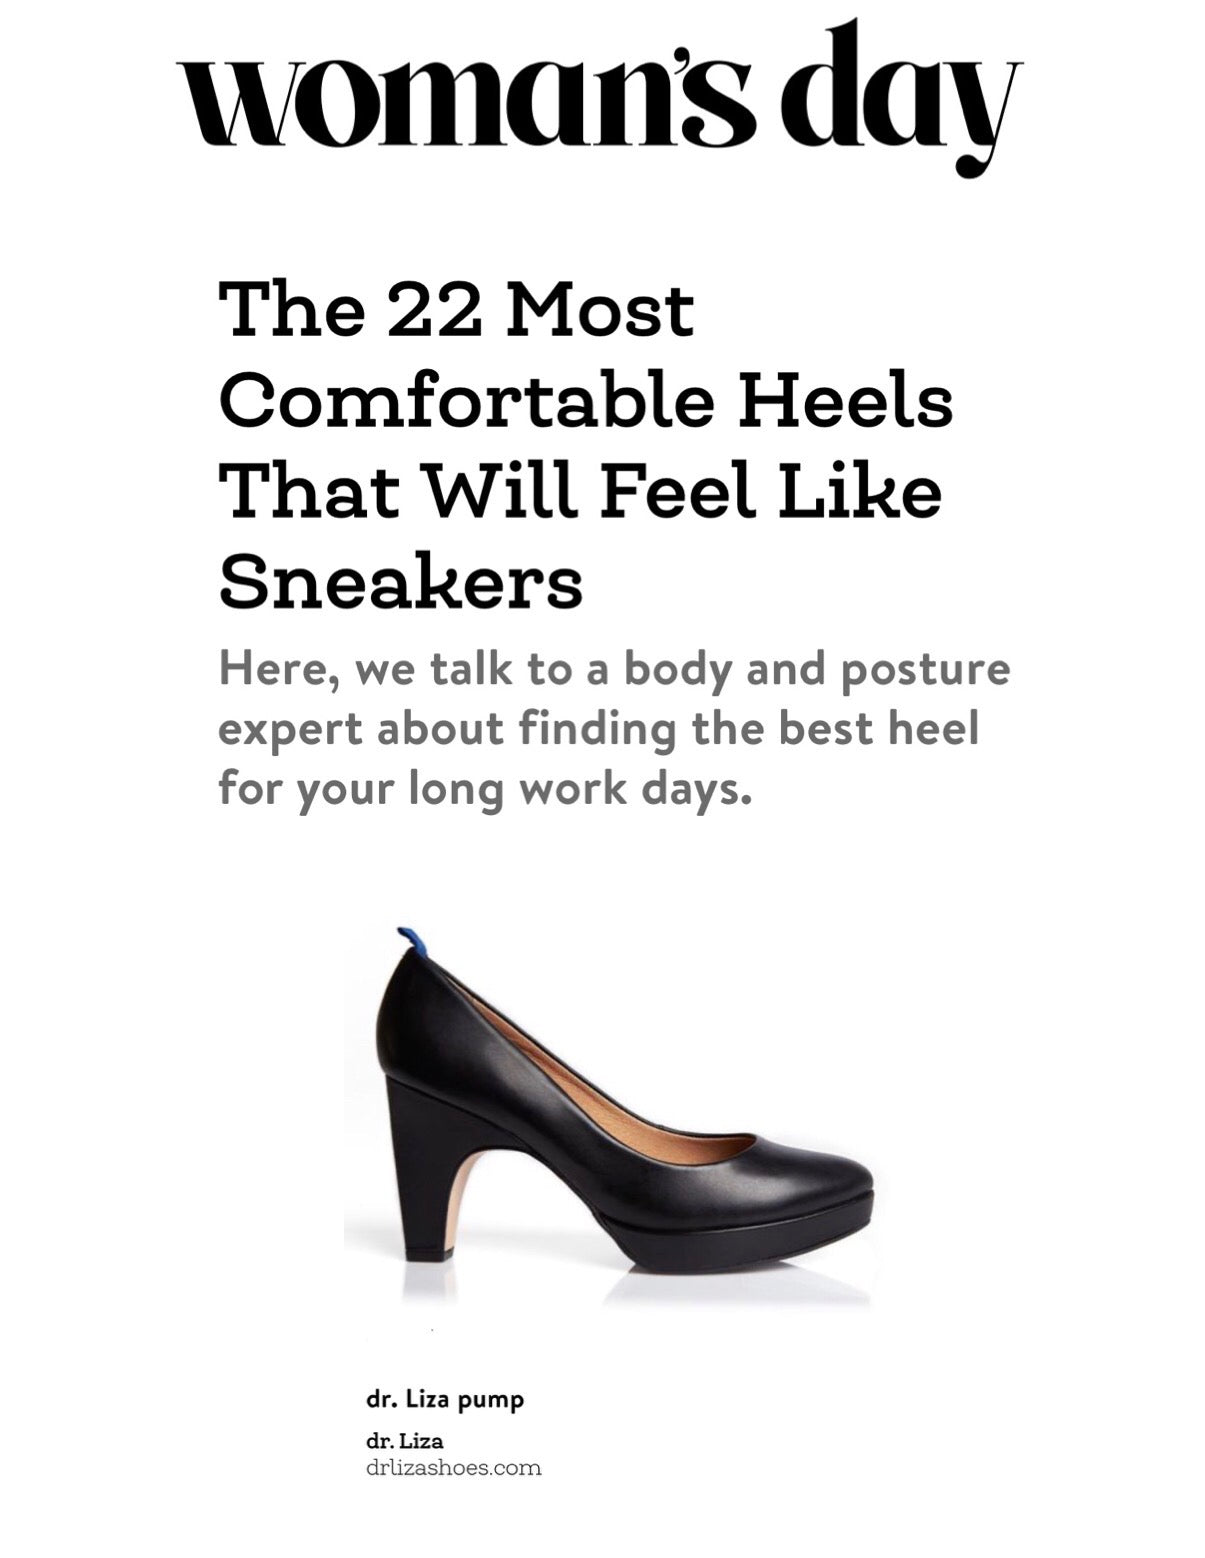 5 Stylish Heels for Work That Are Also Super Comfortable | Entrepreneur